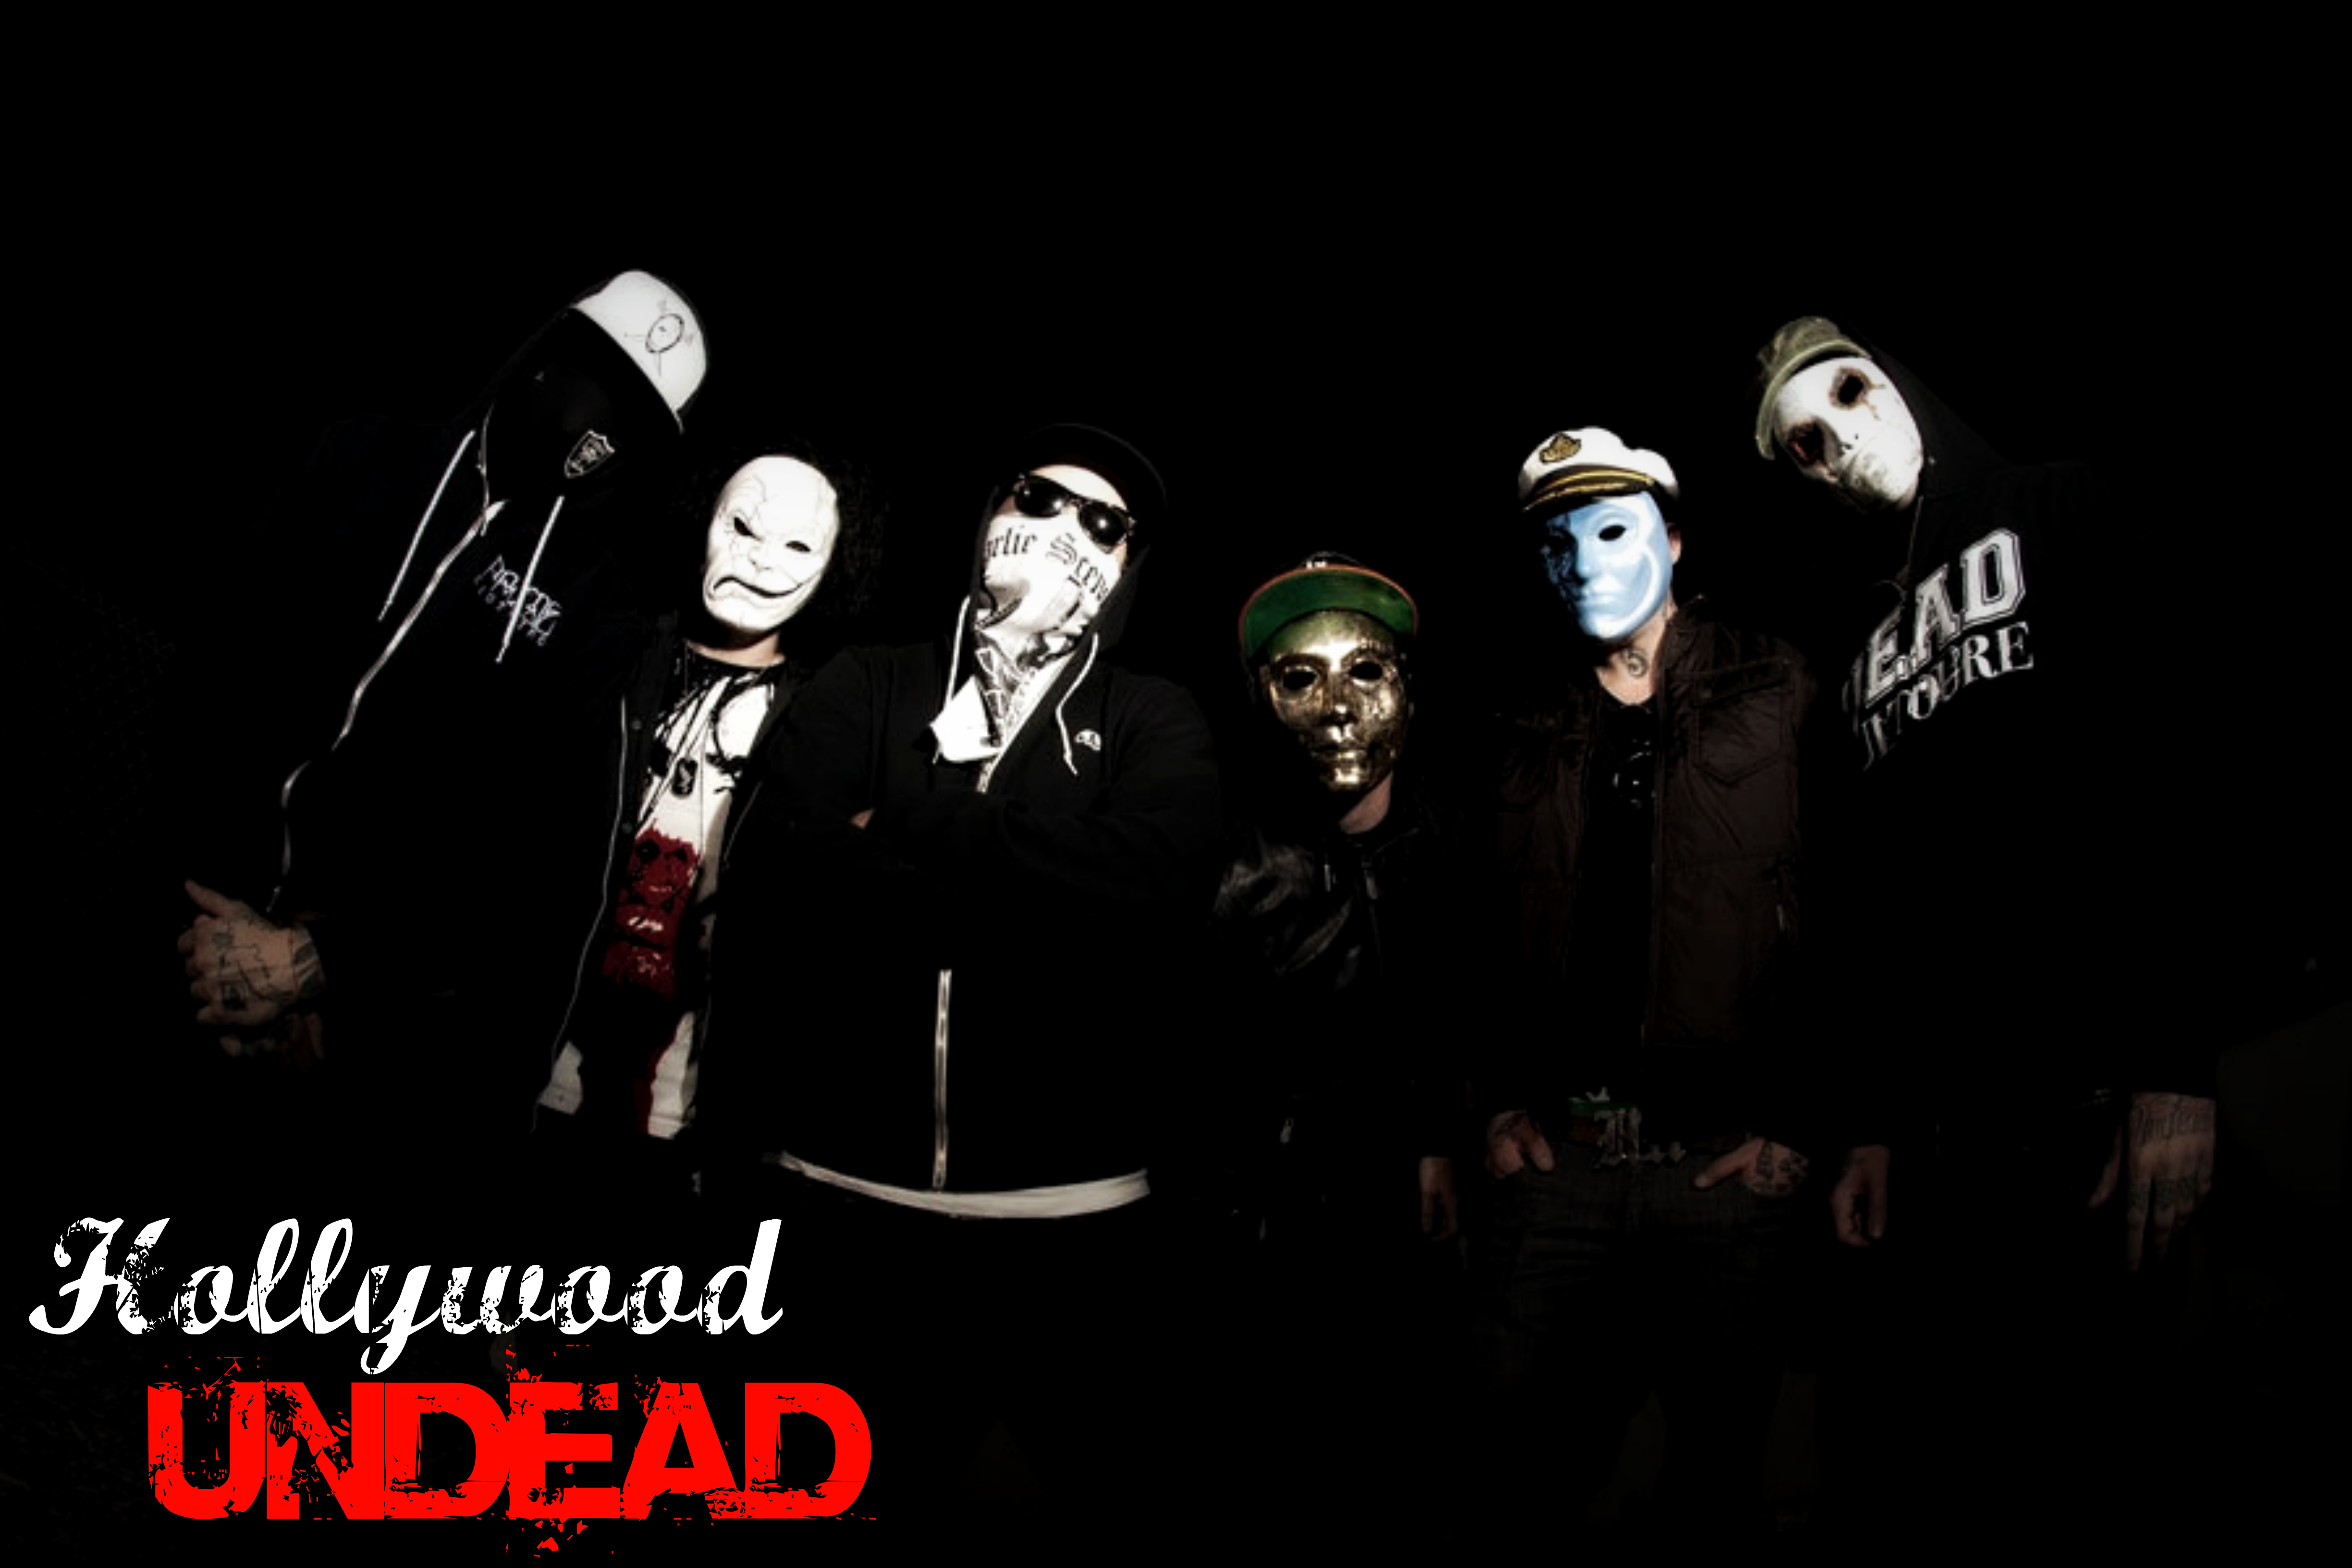 Hollywood Undead   Wallpaper 2 by WelcometoBloodstone on